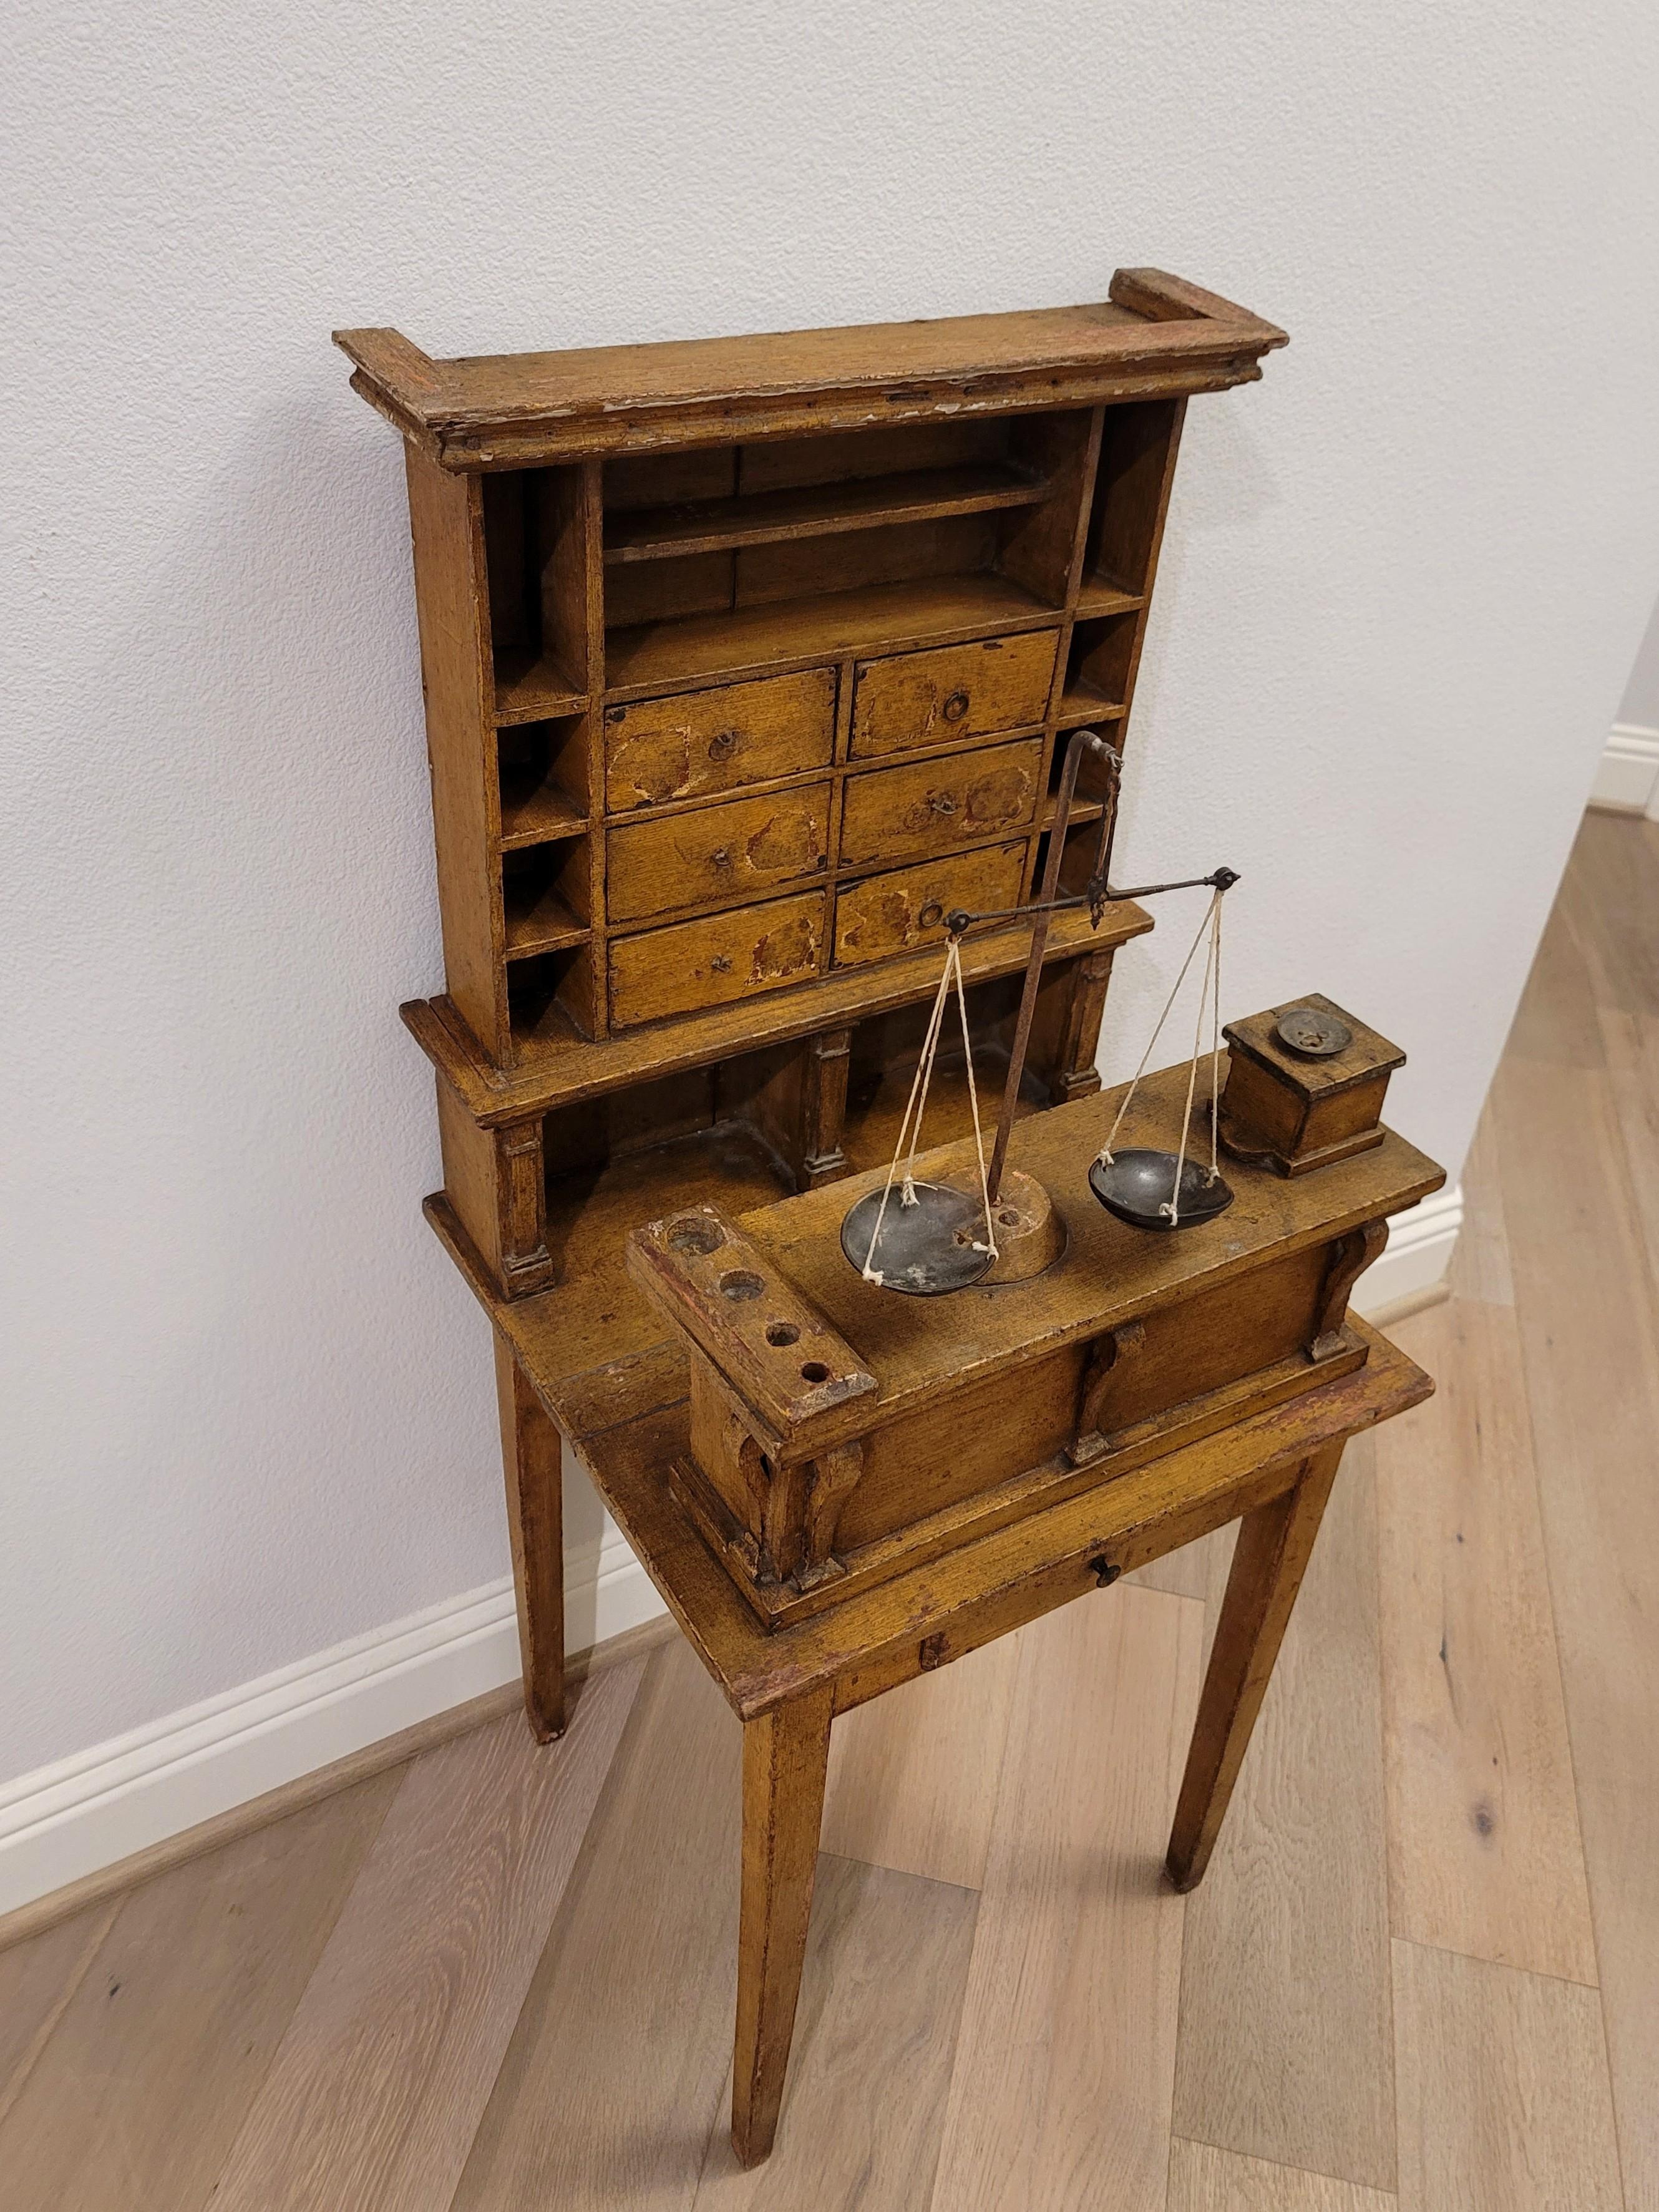 Hand-Crafted Diminutive 19th Century American Mercantile Trade Store Display Model For Sale